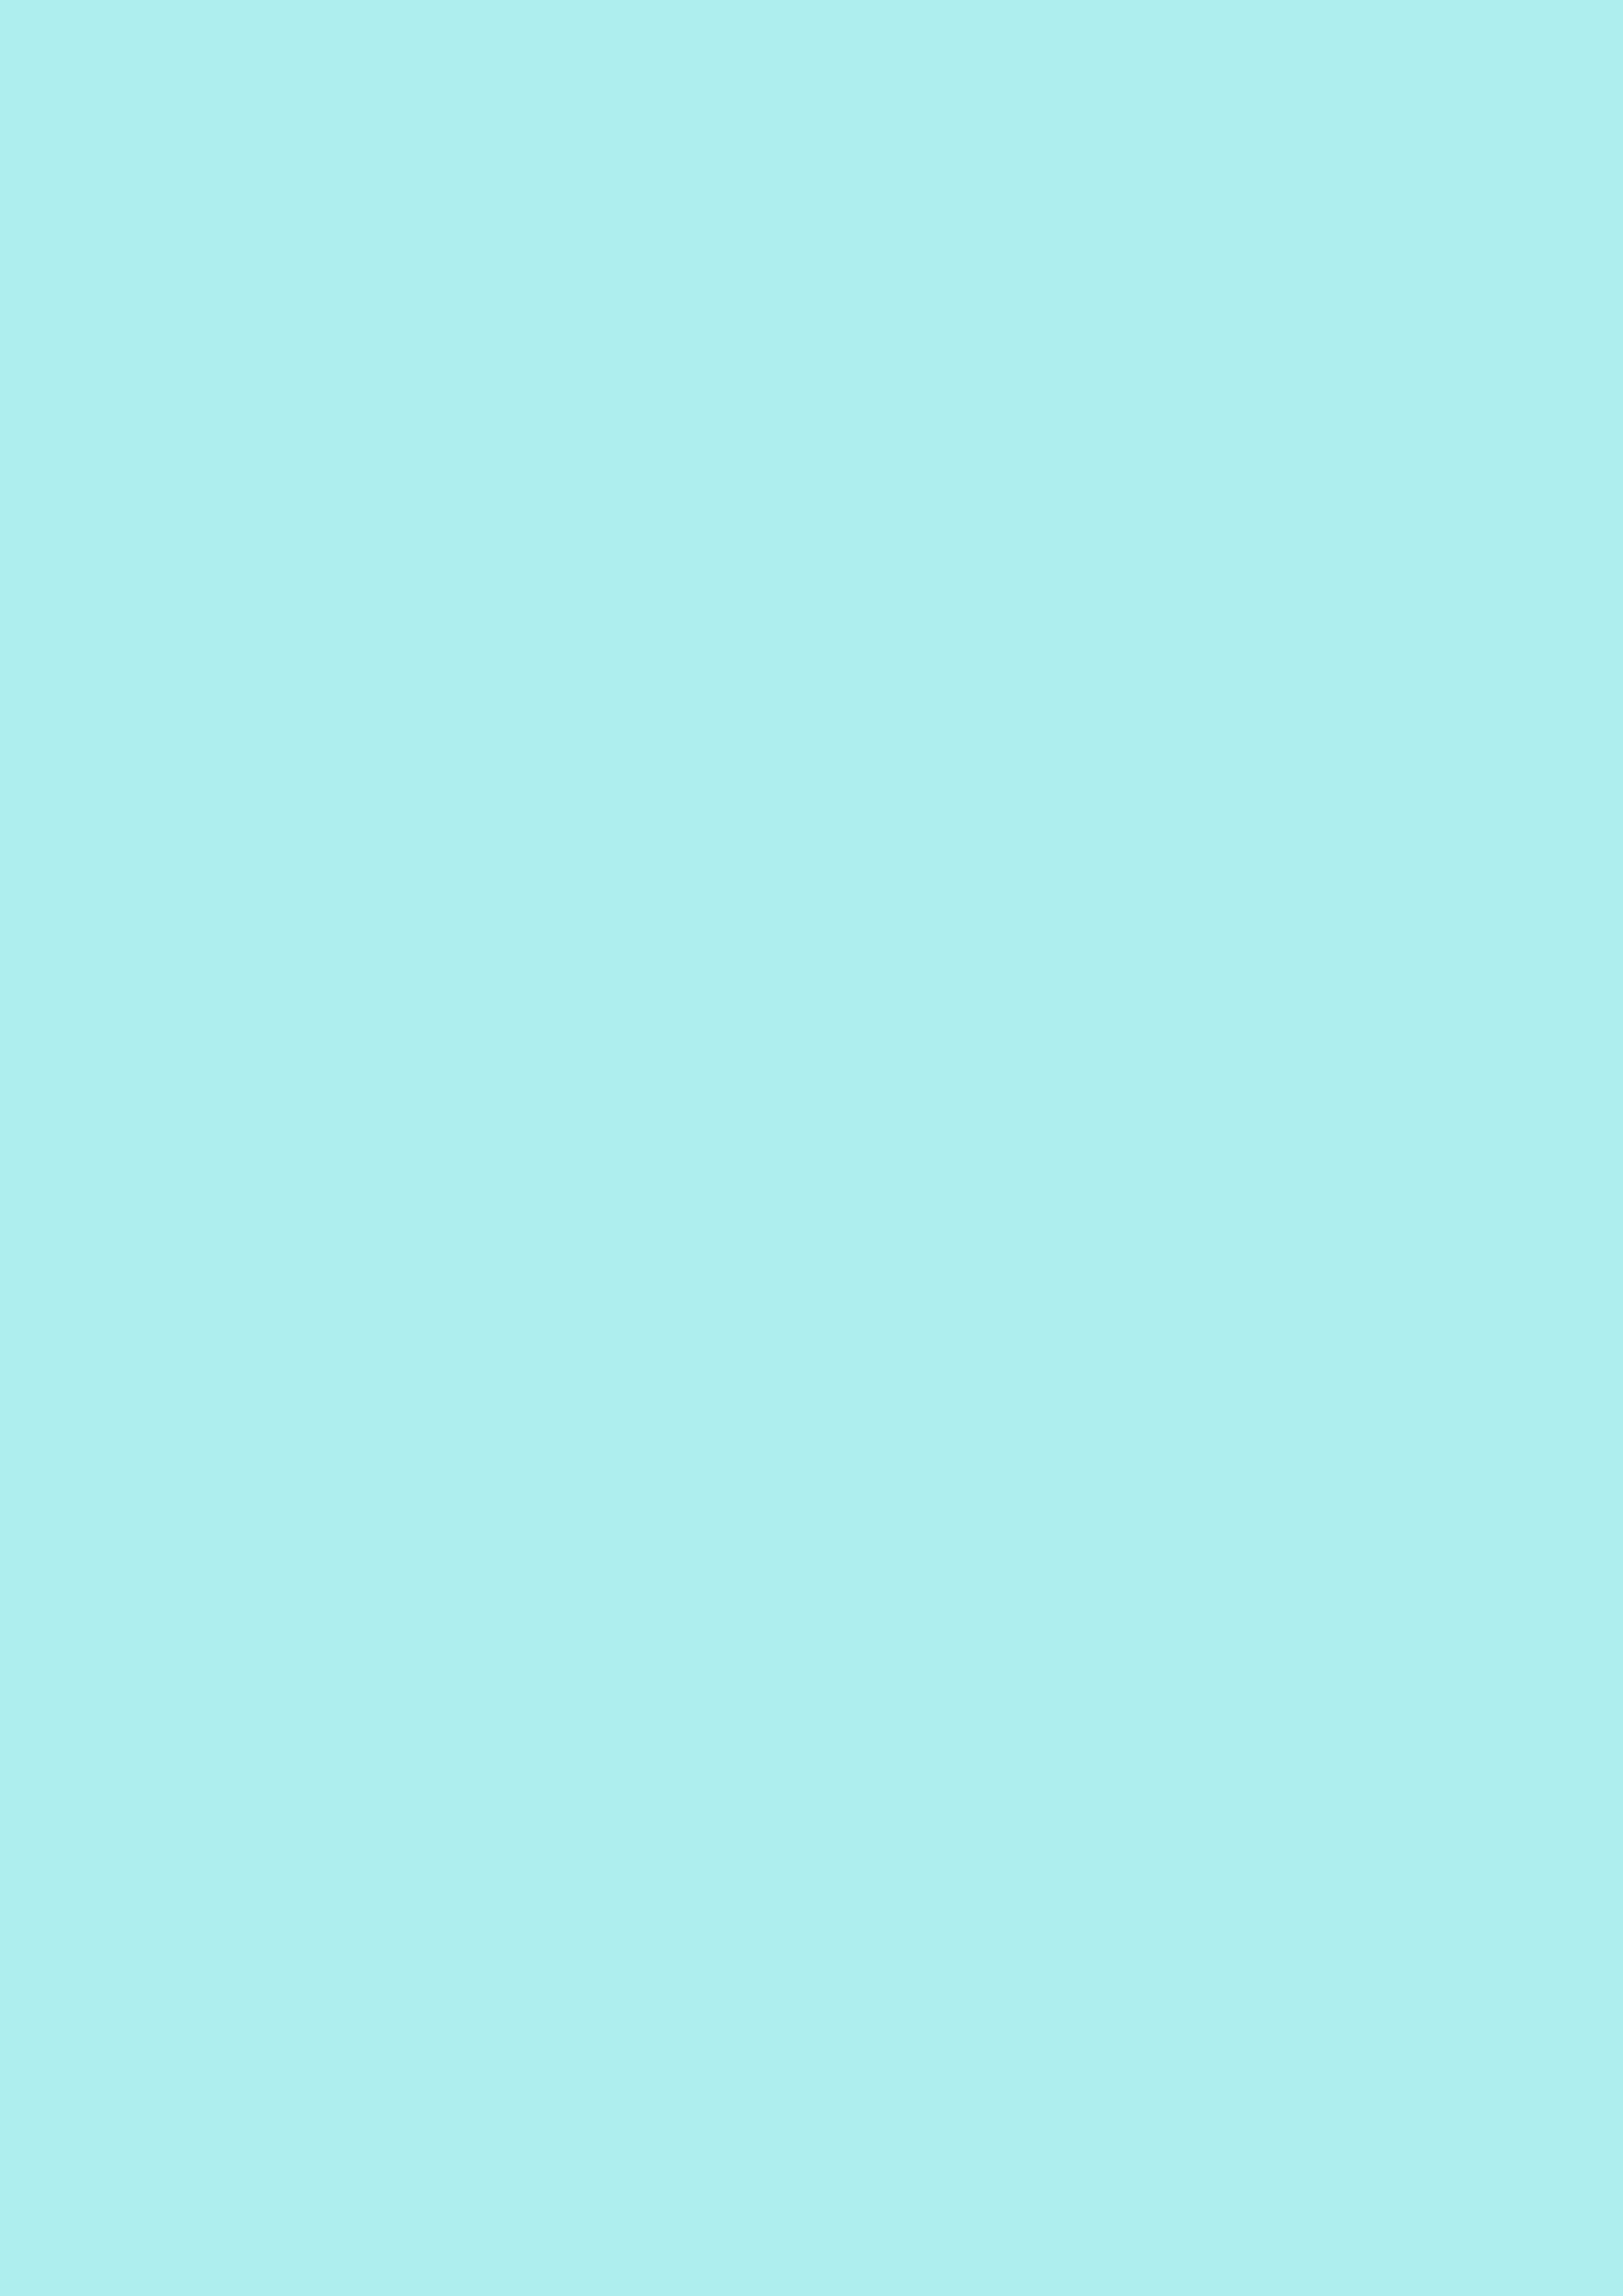 2480x3508 Pale Turquoise Solid Color Background